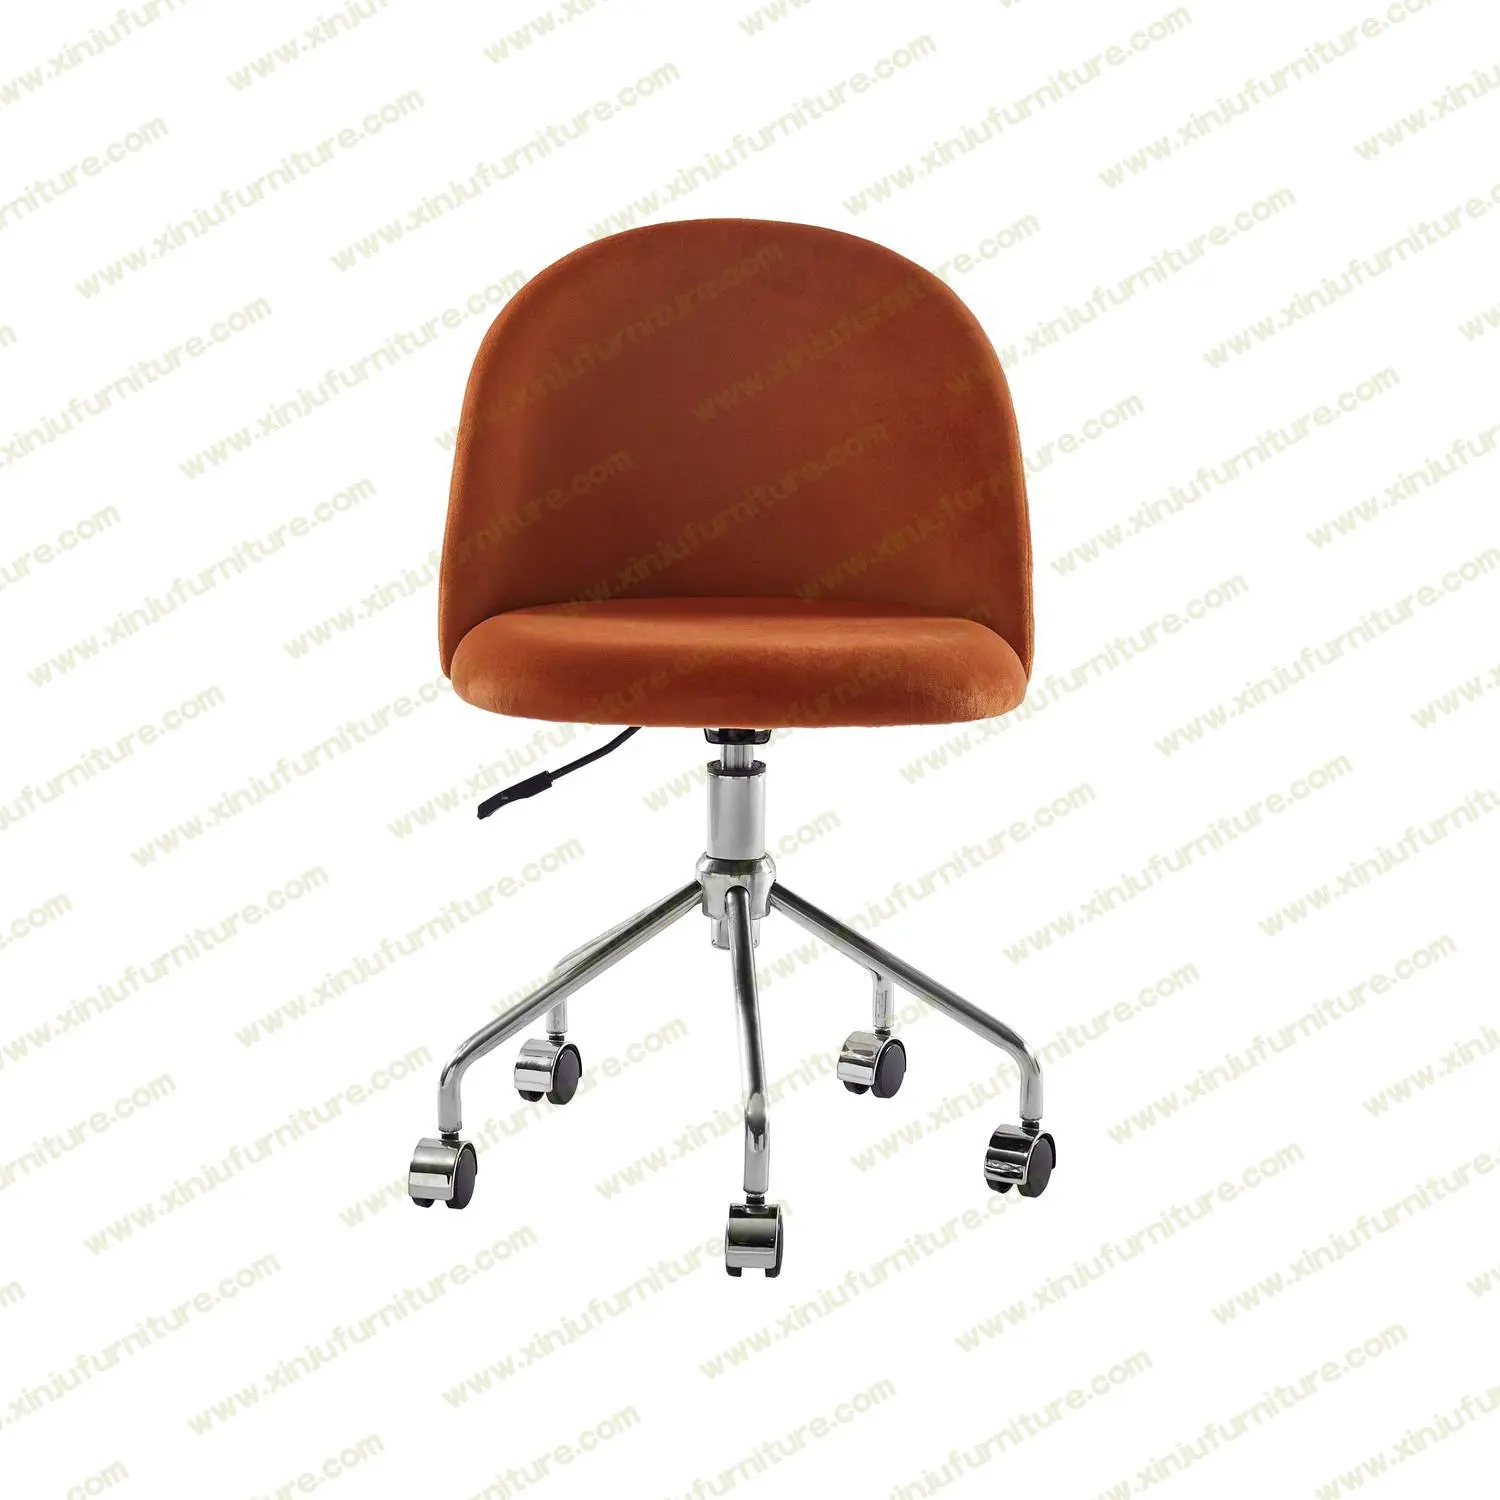 Simple movable tufted office chair light red